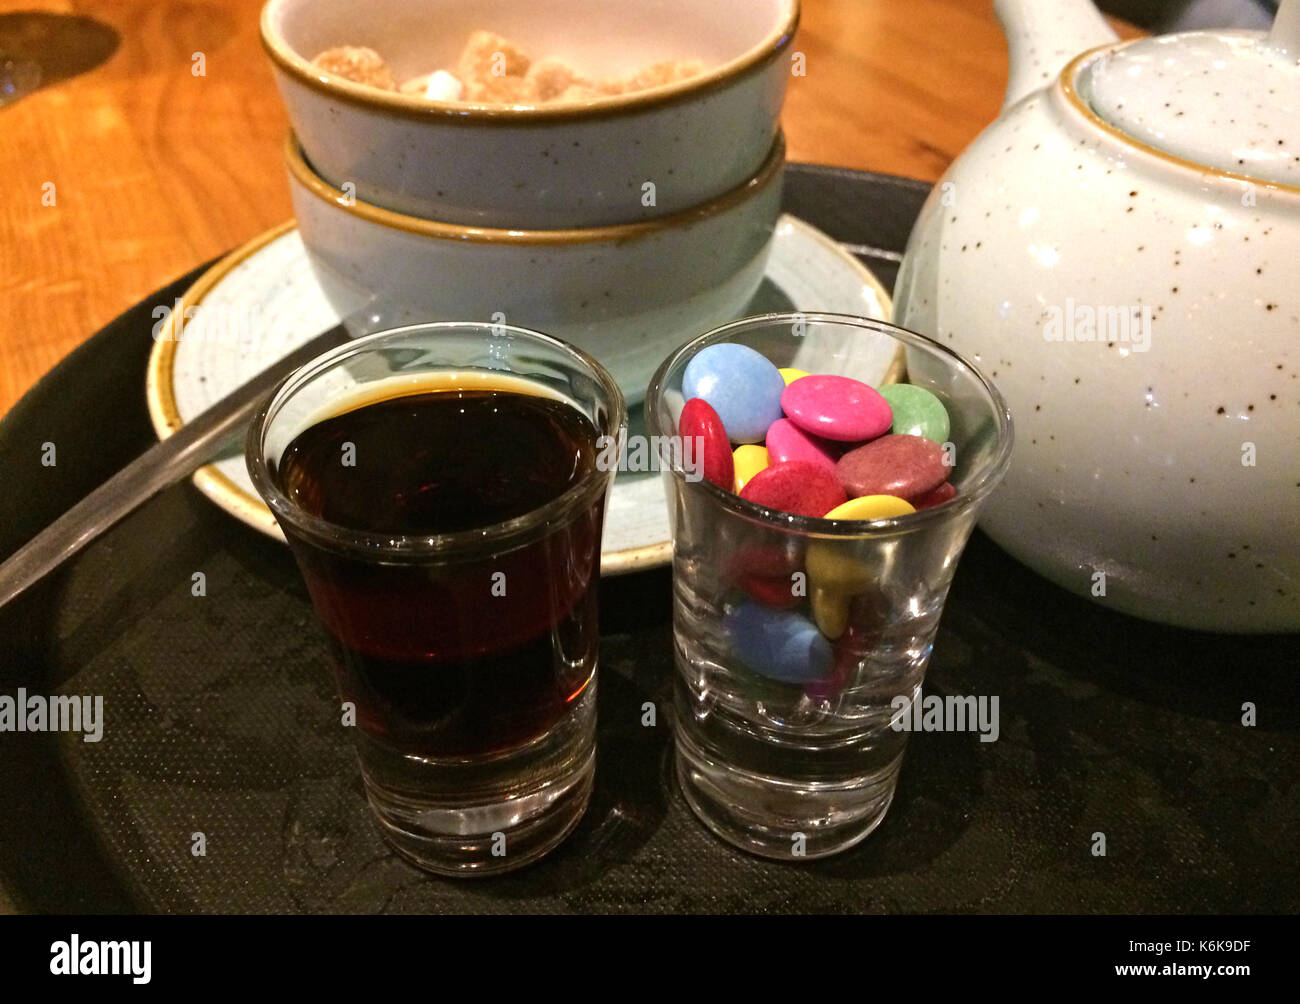 Shot of Jagermeister (German spirit) served with candy Stock Photo